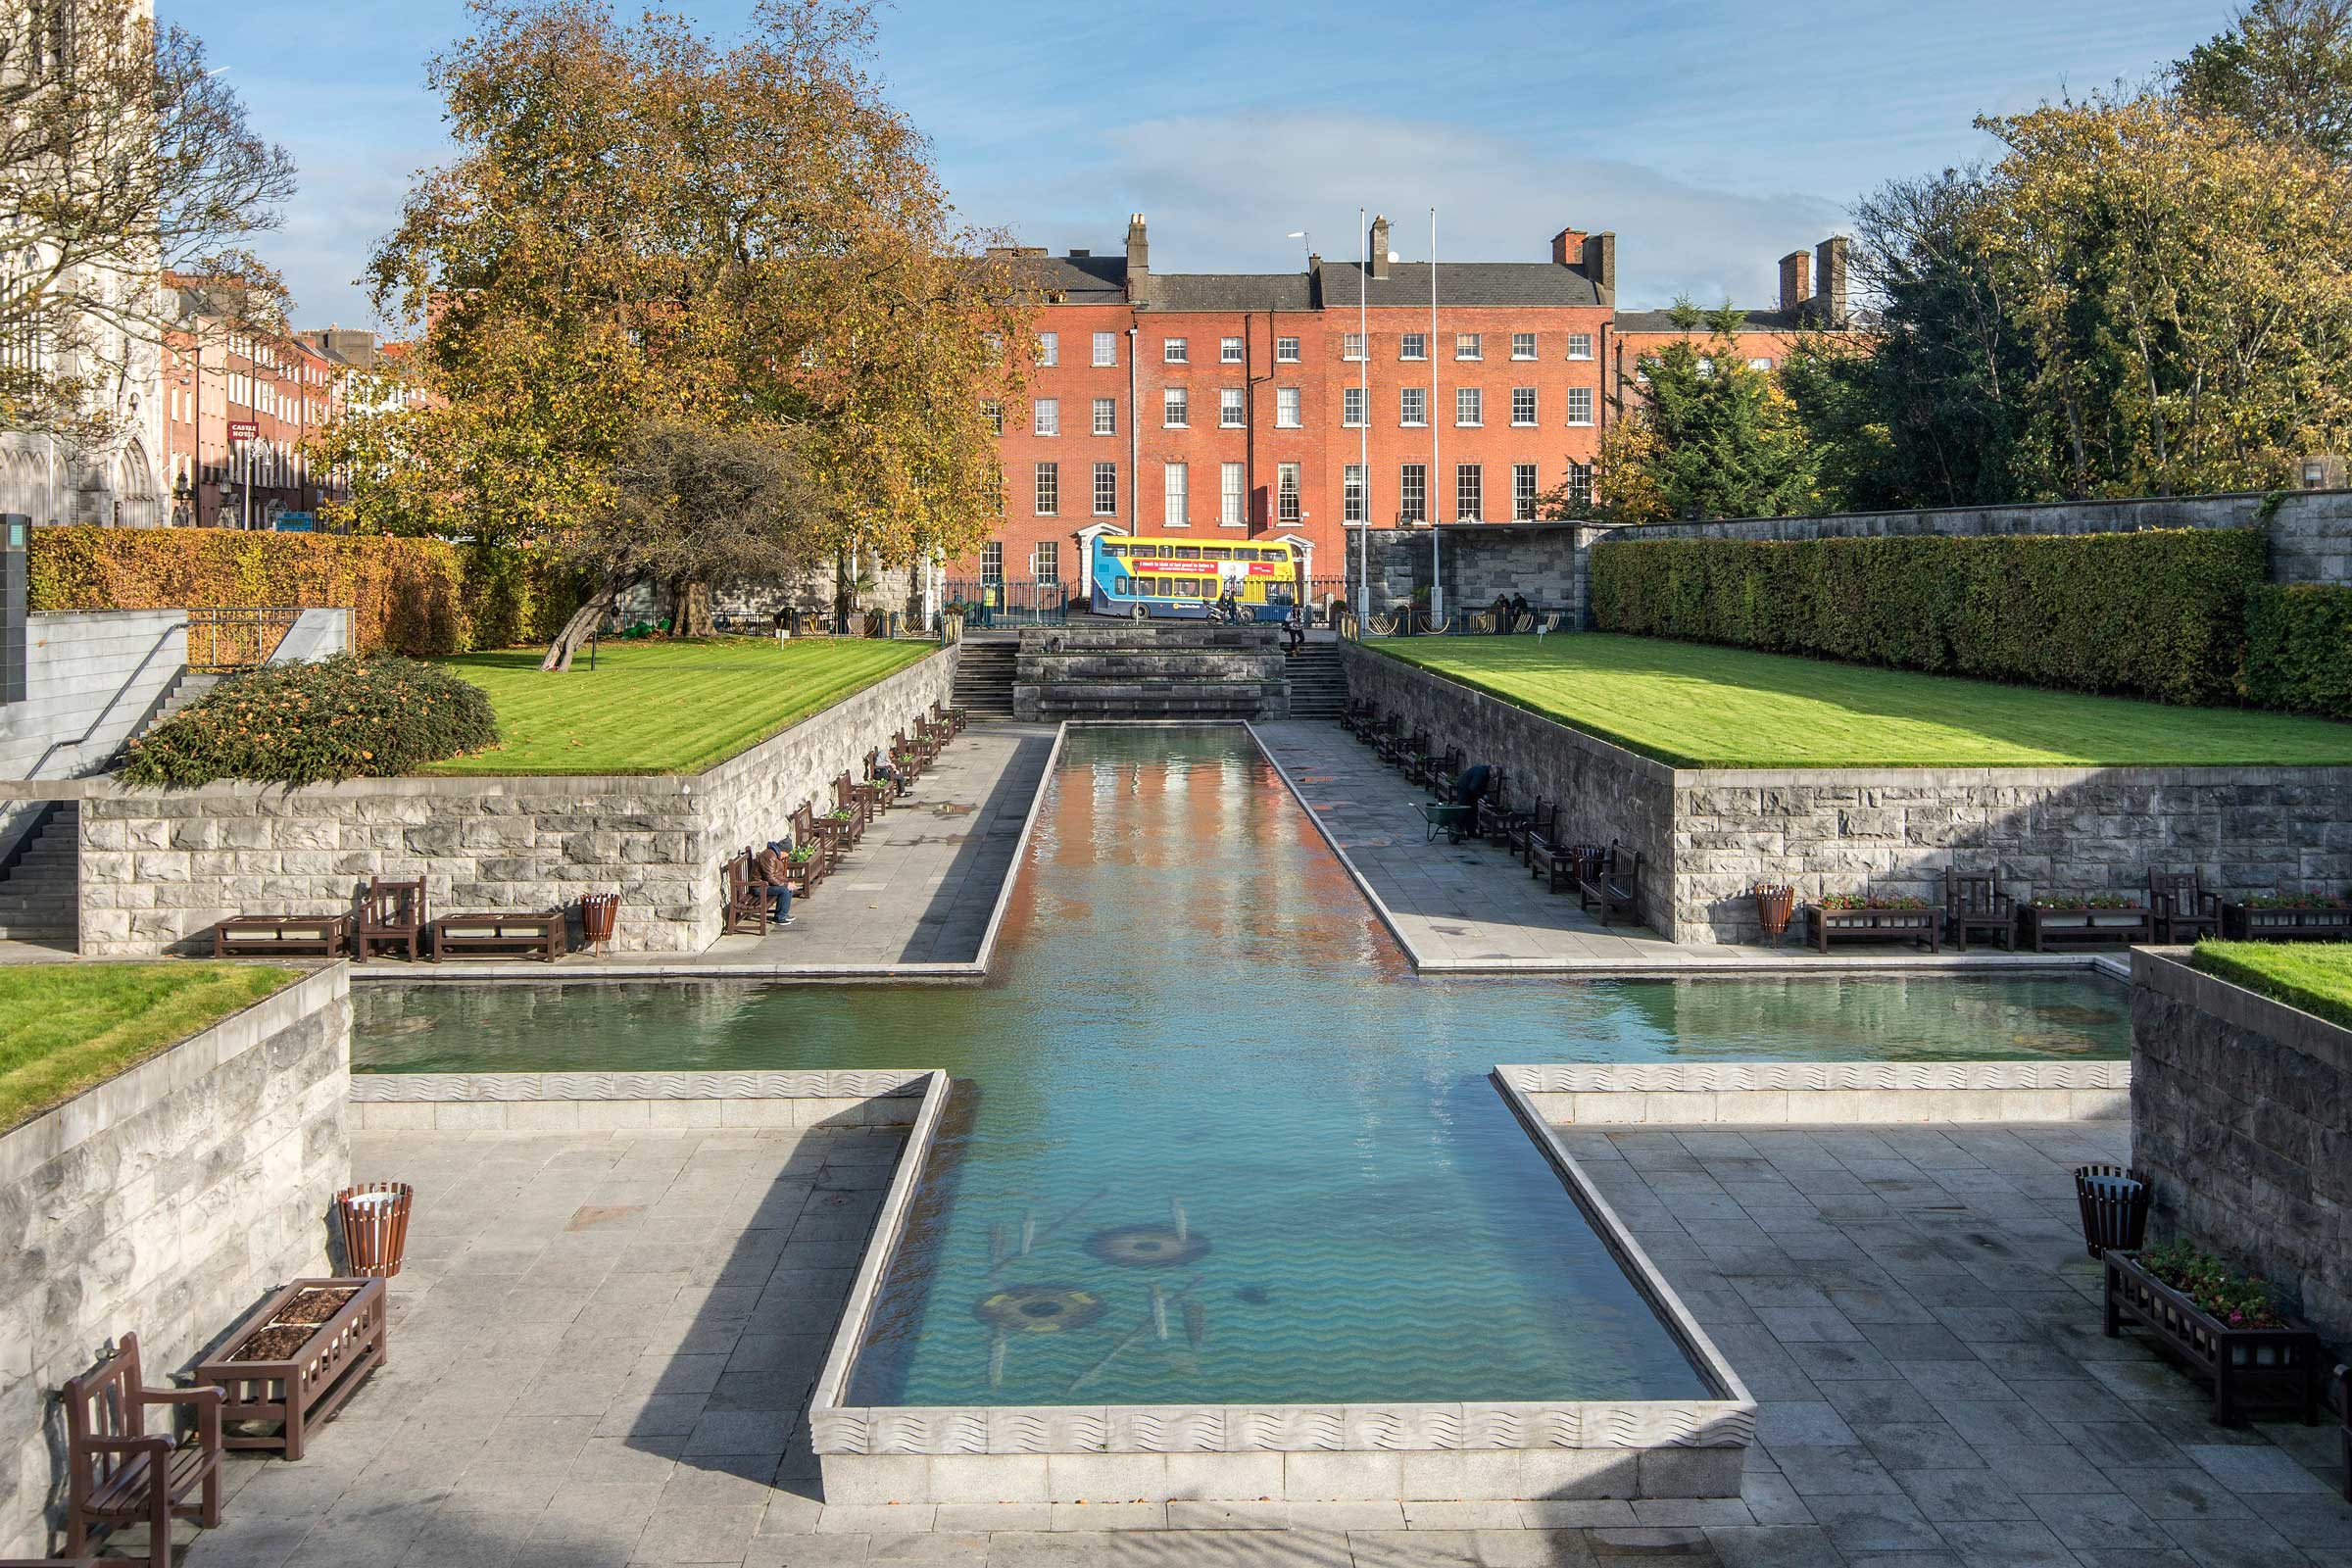  The cross-shaped pool in the Garden of Remembrance in Parnell Square, Dublin City centre